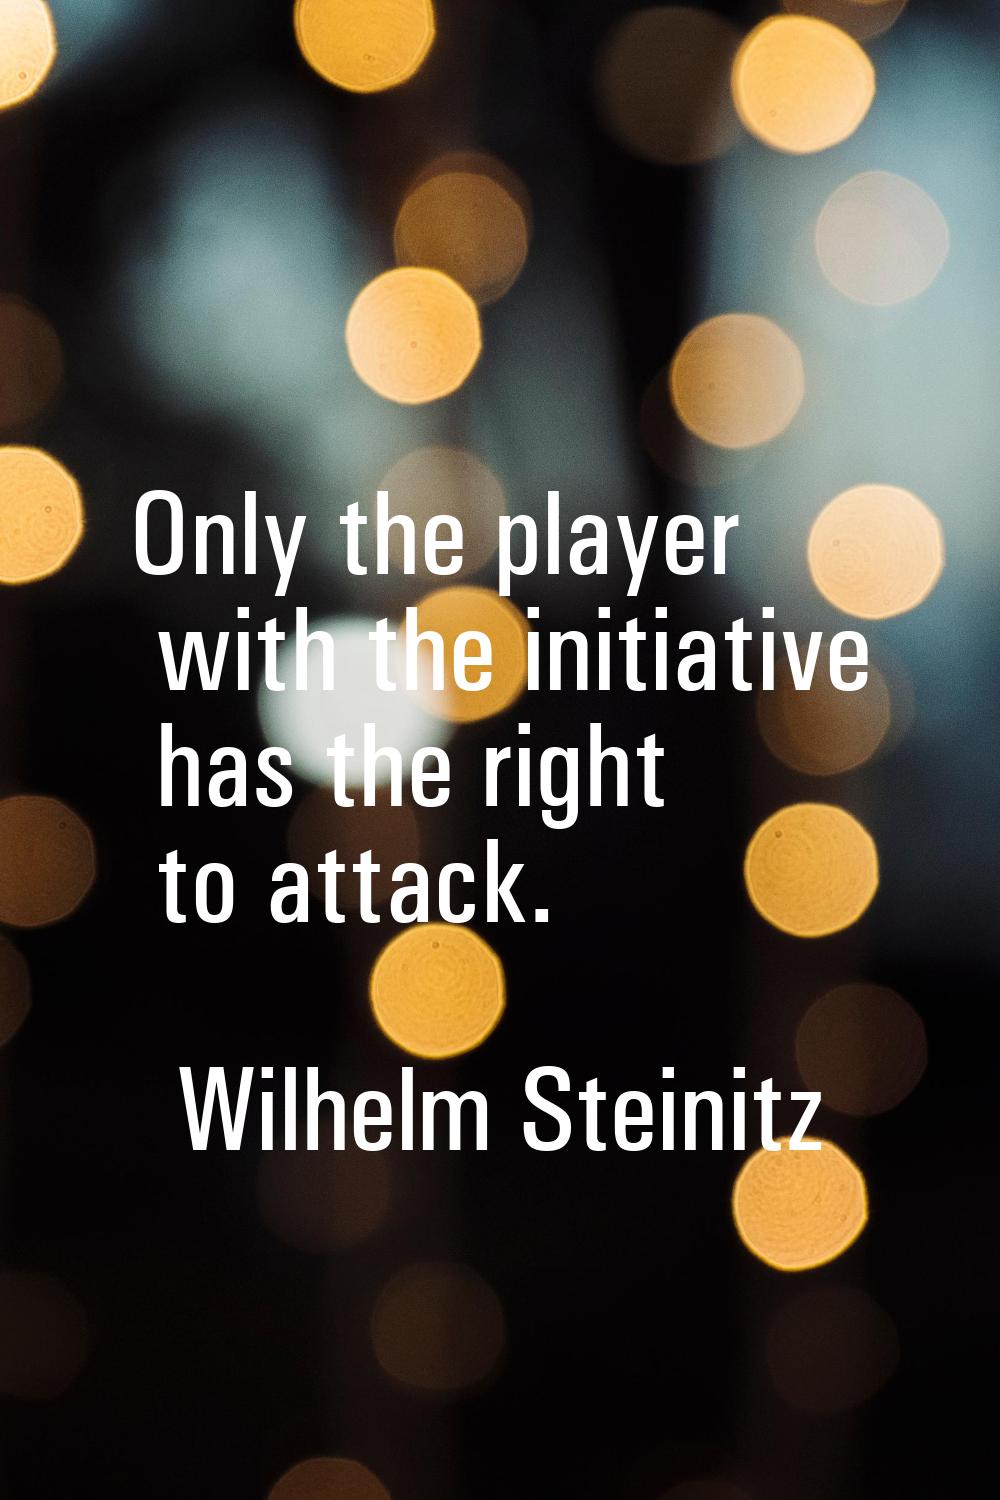 Only the player with the initiative has the right to attack.